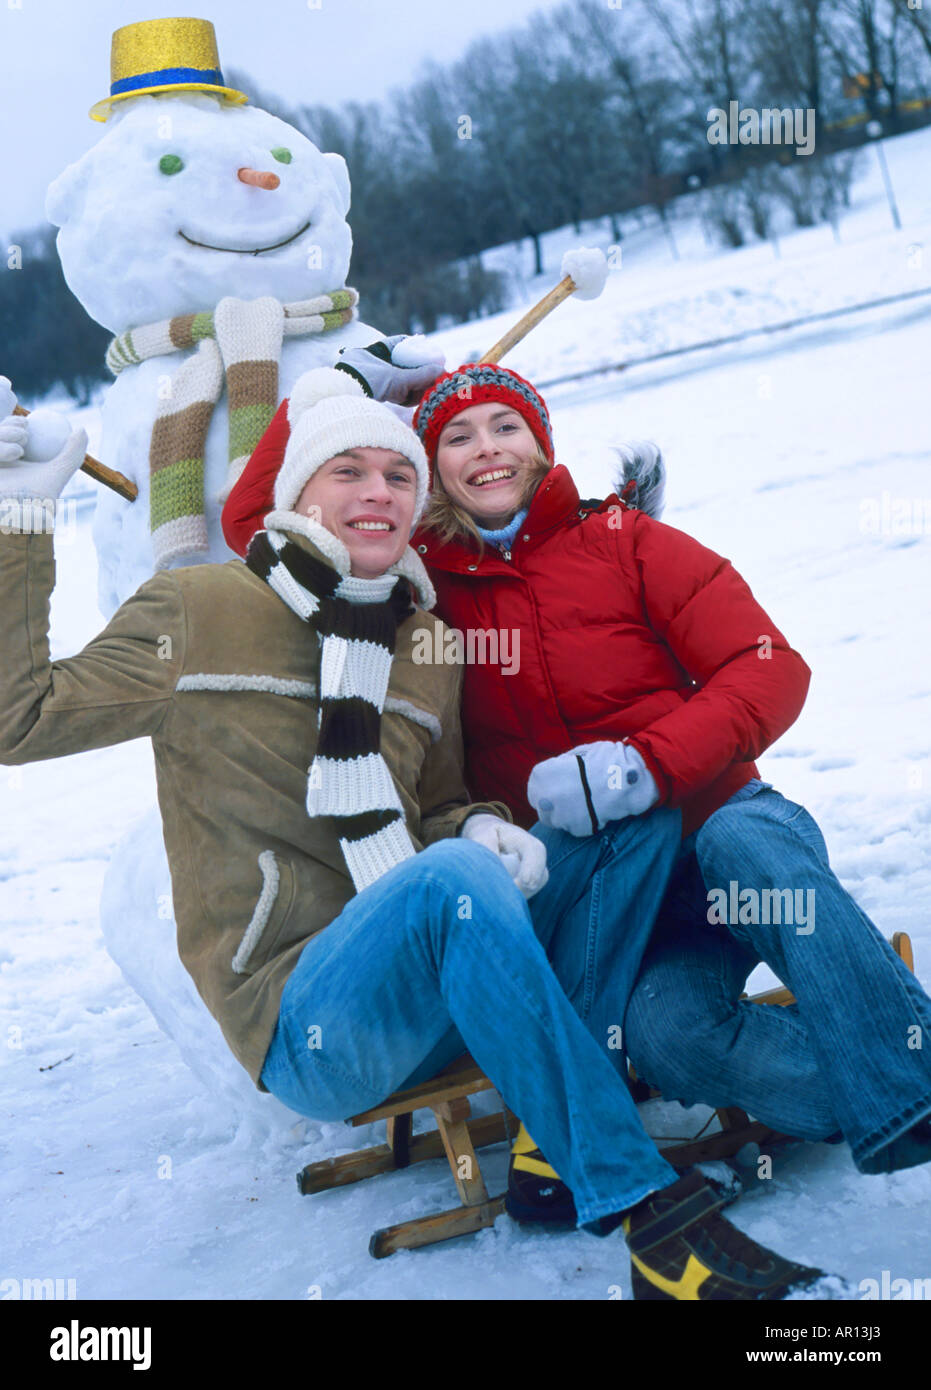 outdoor day winter snow tree trees park woman man 25 30 young pair couple smile smiling hug embrace crouch cap pompom caps sc Stock Photo